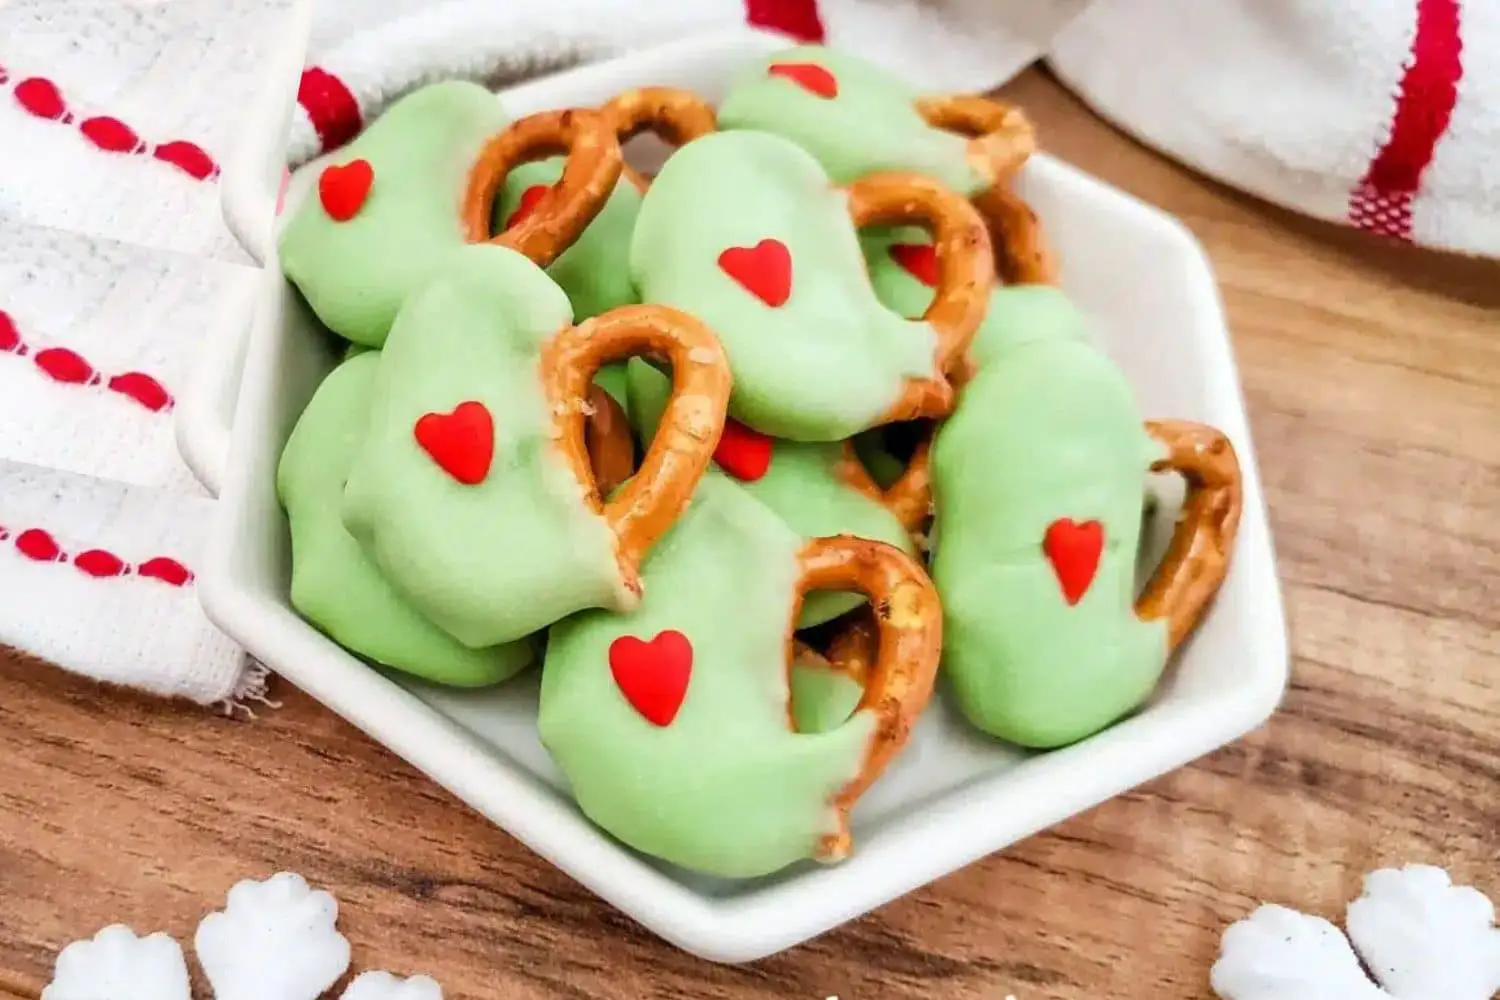 Grinch Candy-Coated Pretzels